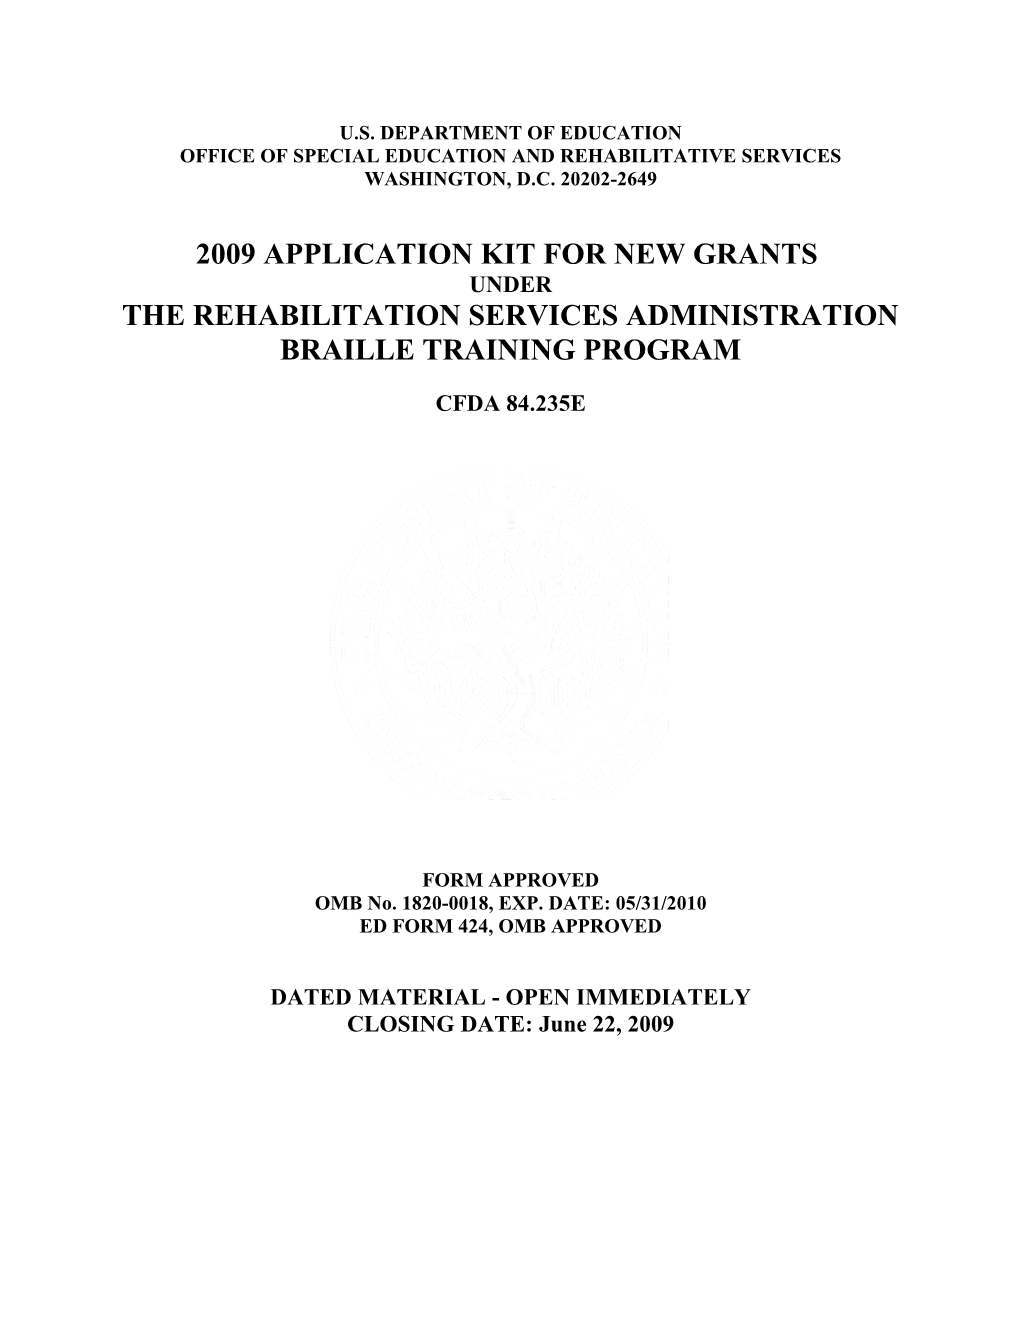 2009 Application Kit for New Grants Under the Rehabilitation Services Administration Braille